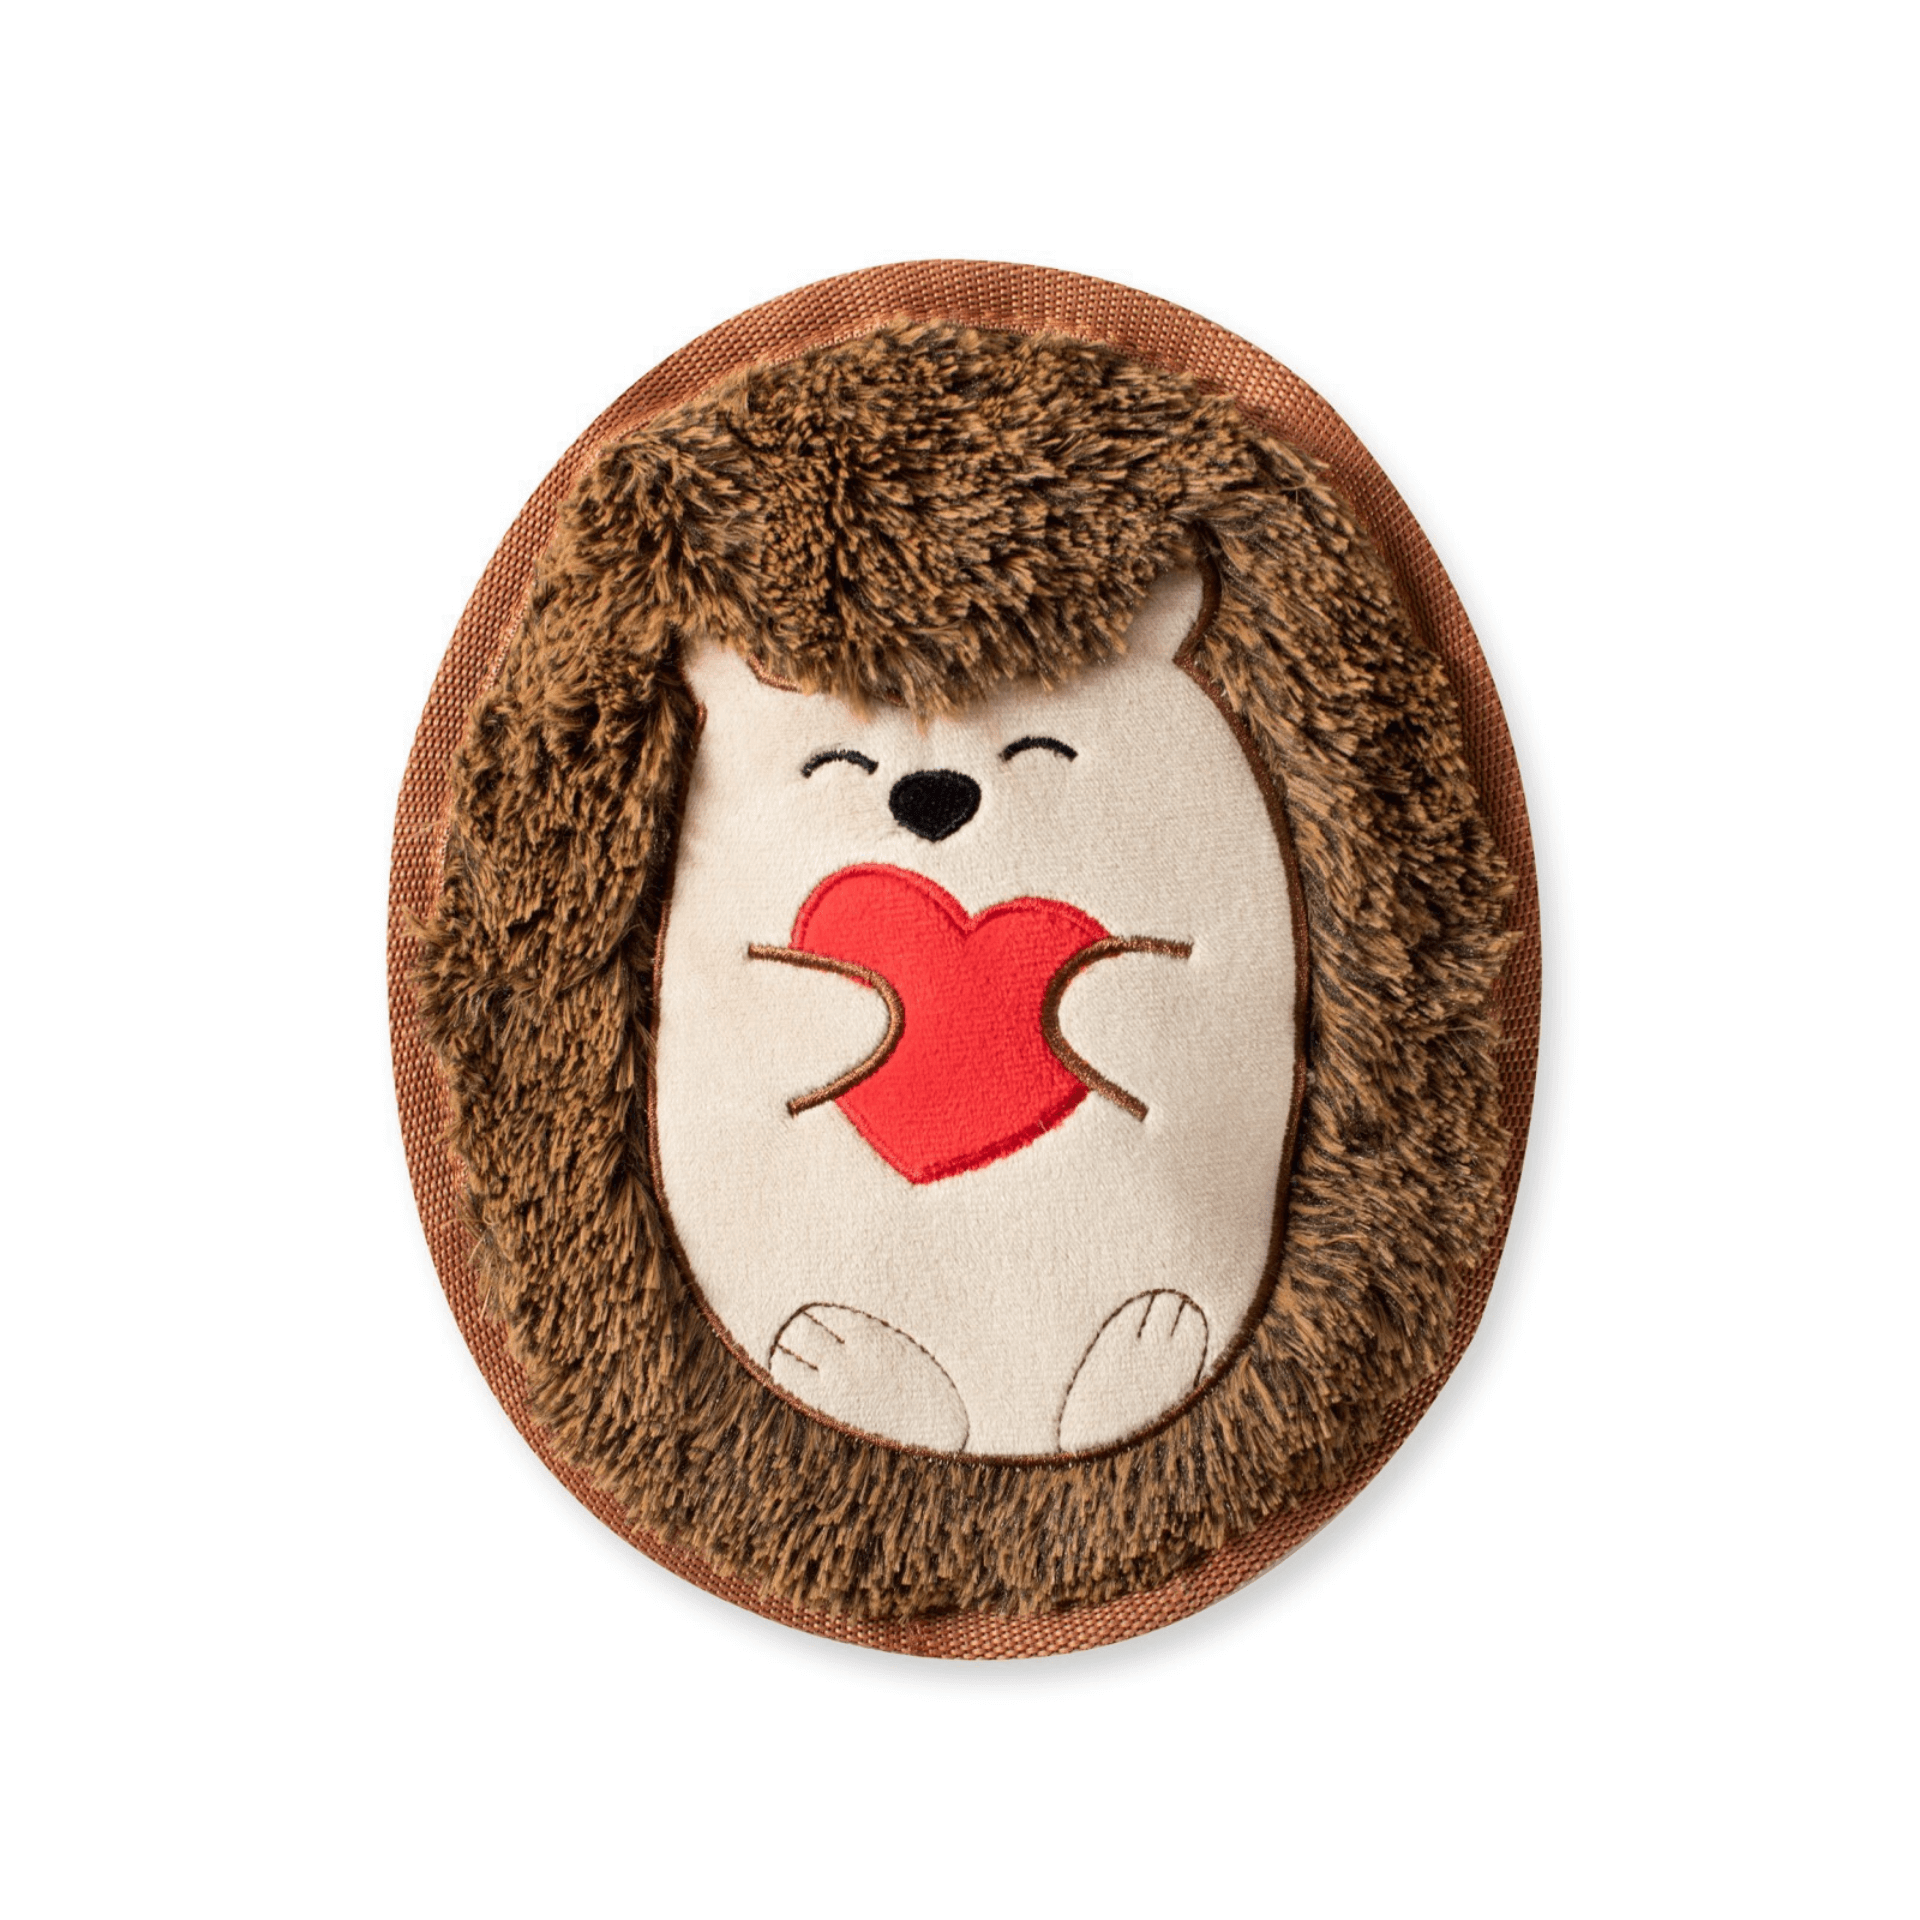 Plush valentine dog toy for ruffer play, Let's Pawty